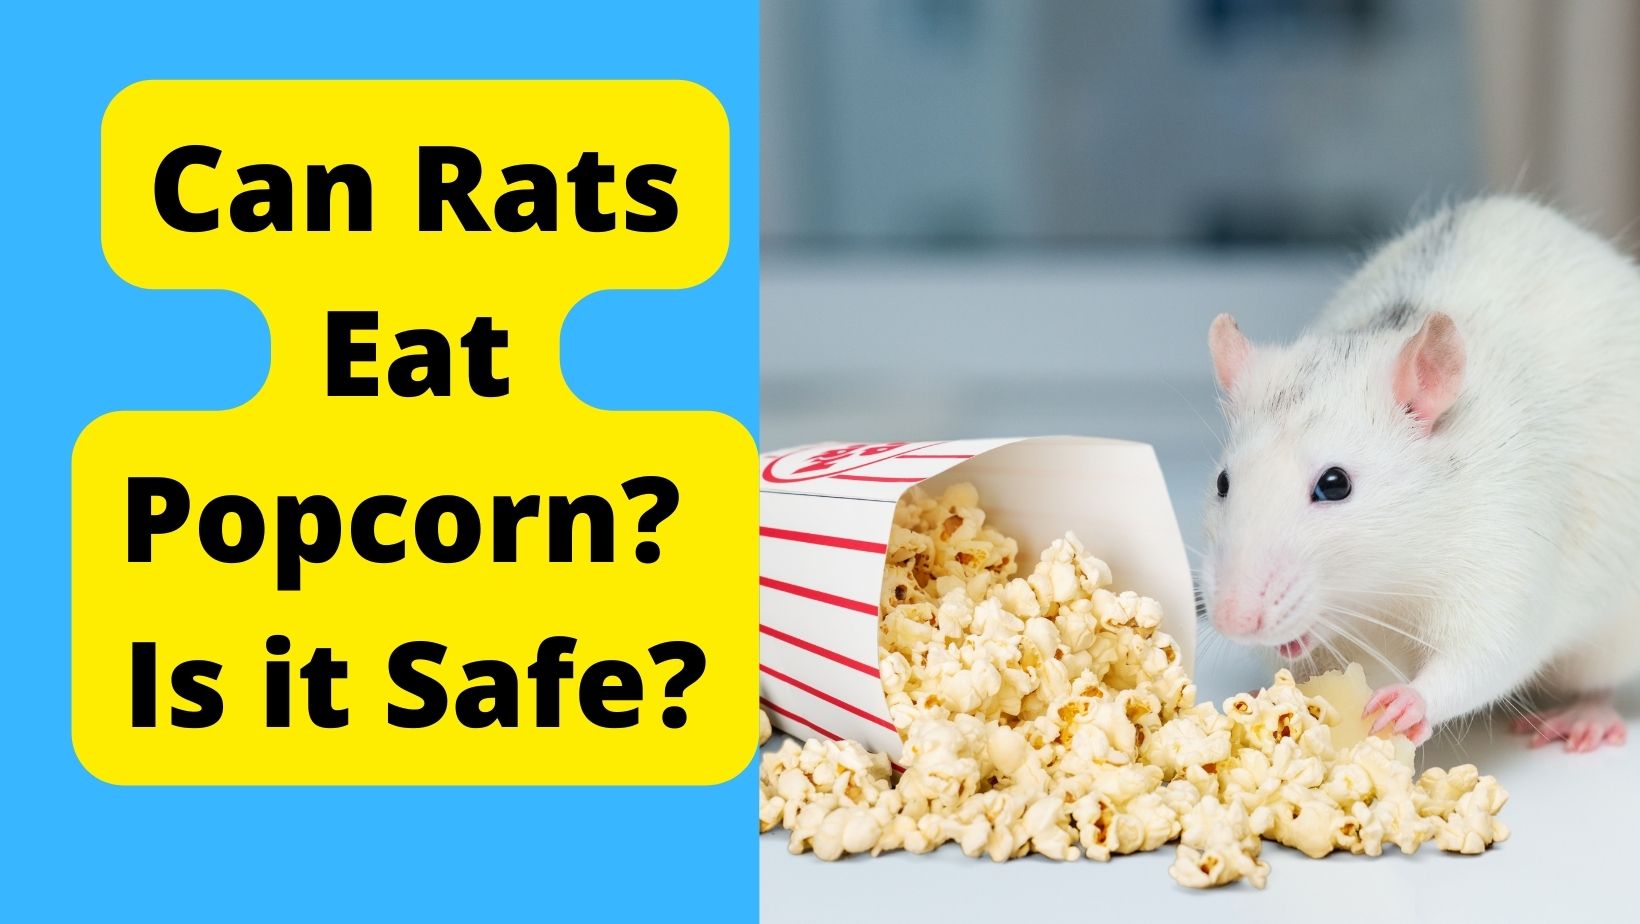 Can Rats Eat Popcorn? Is It Safe?